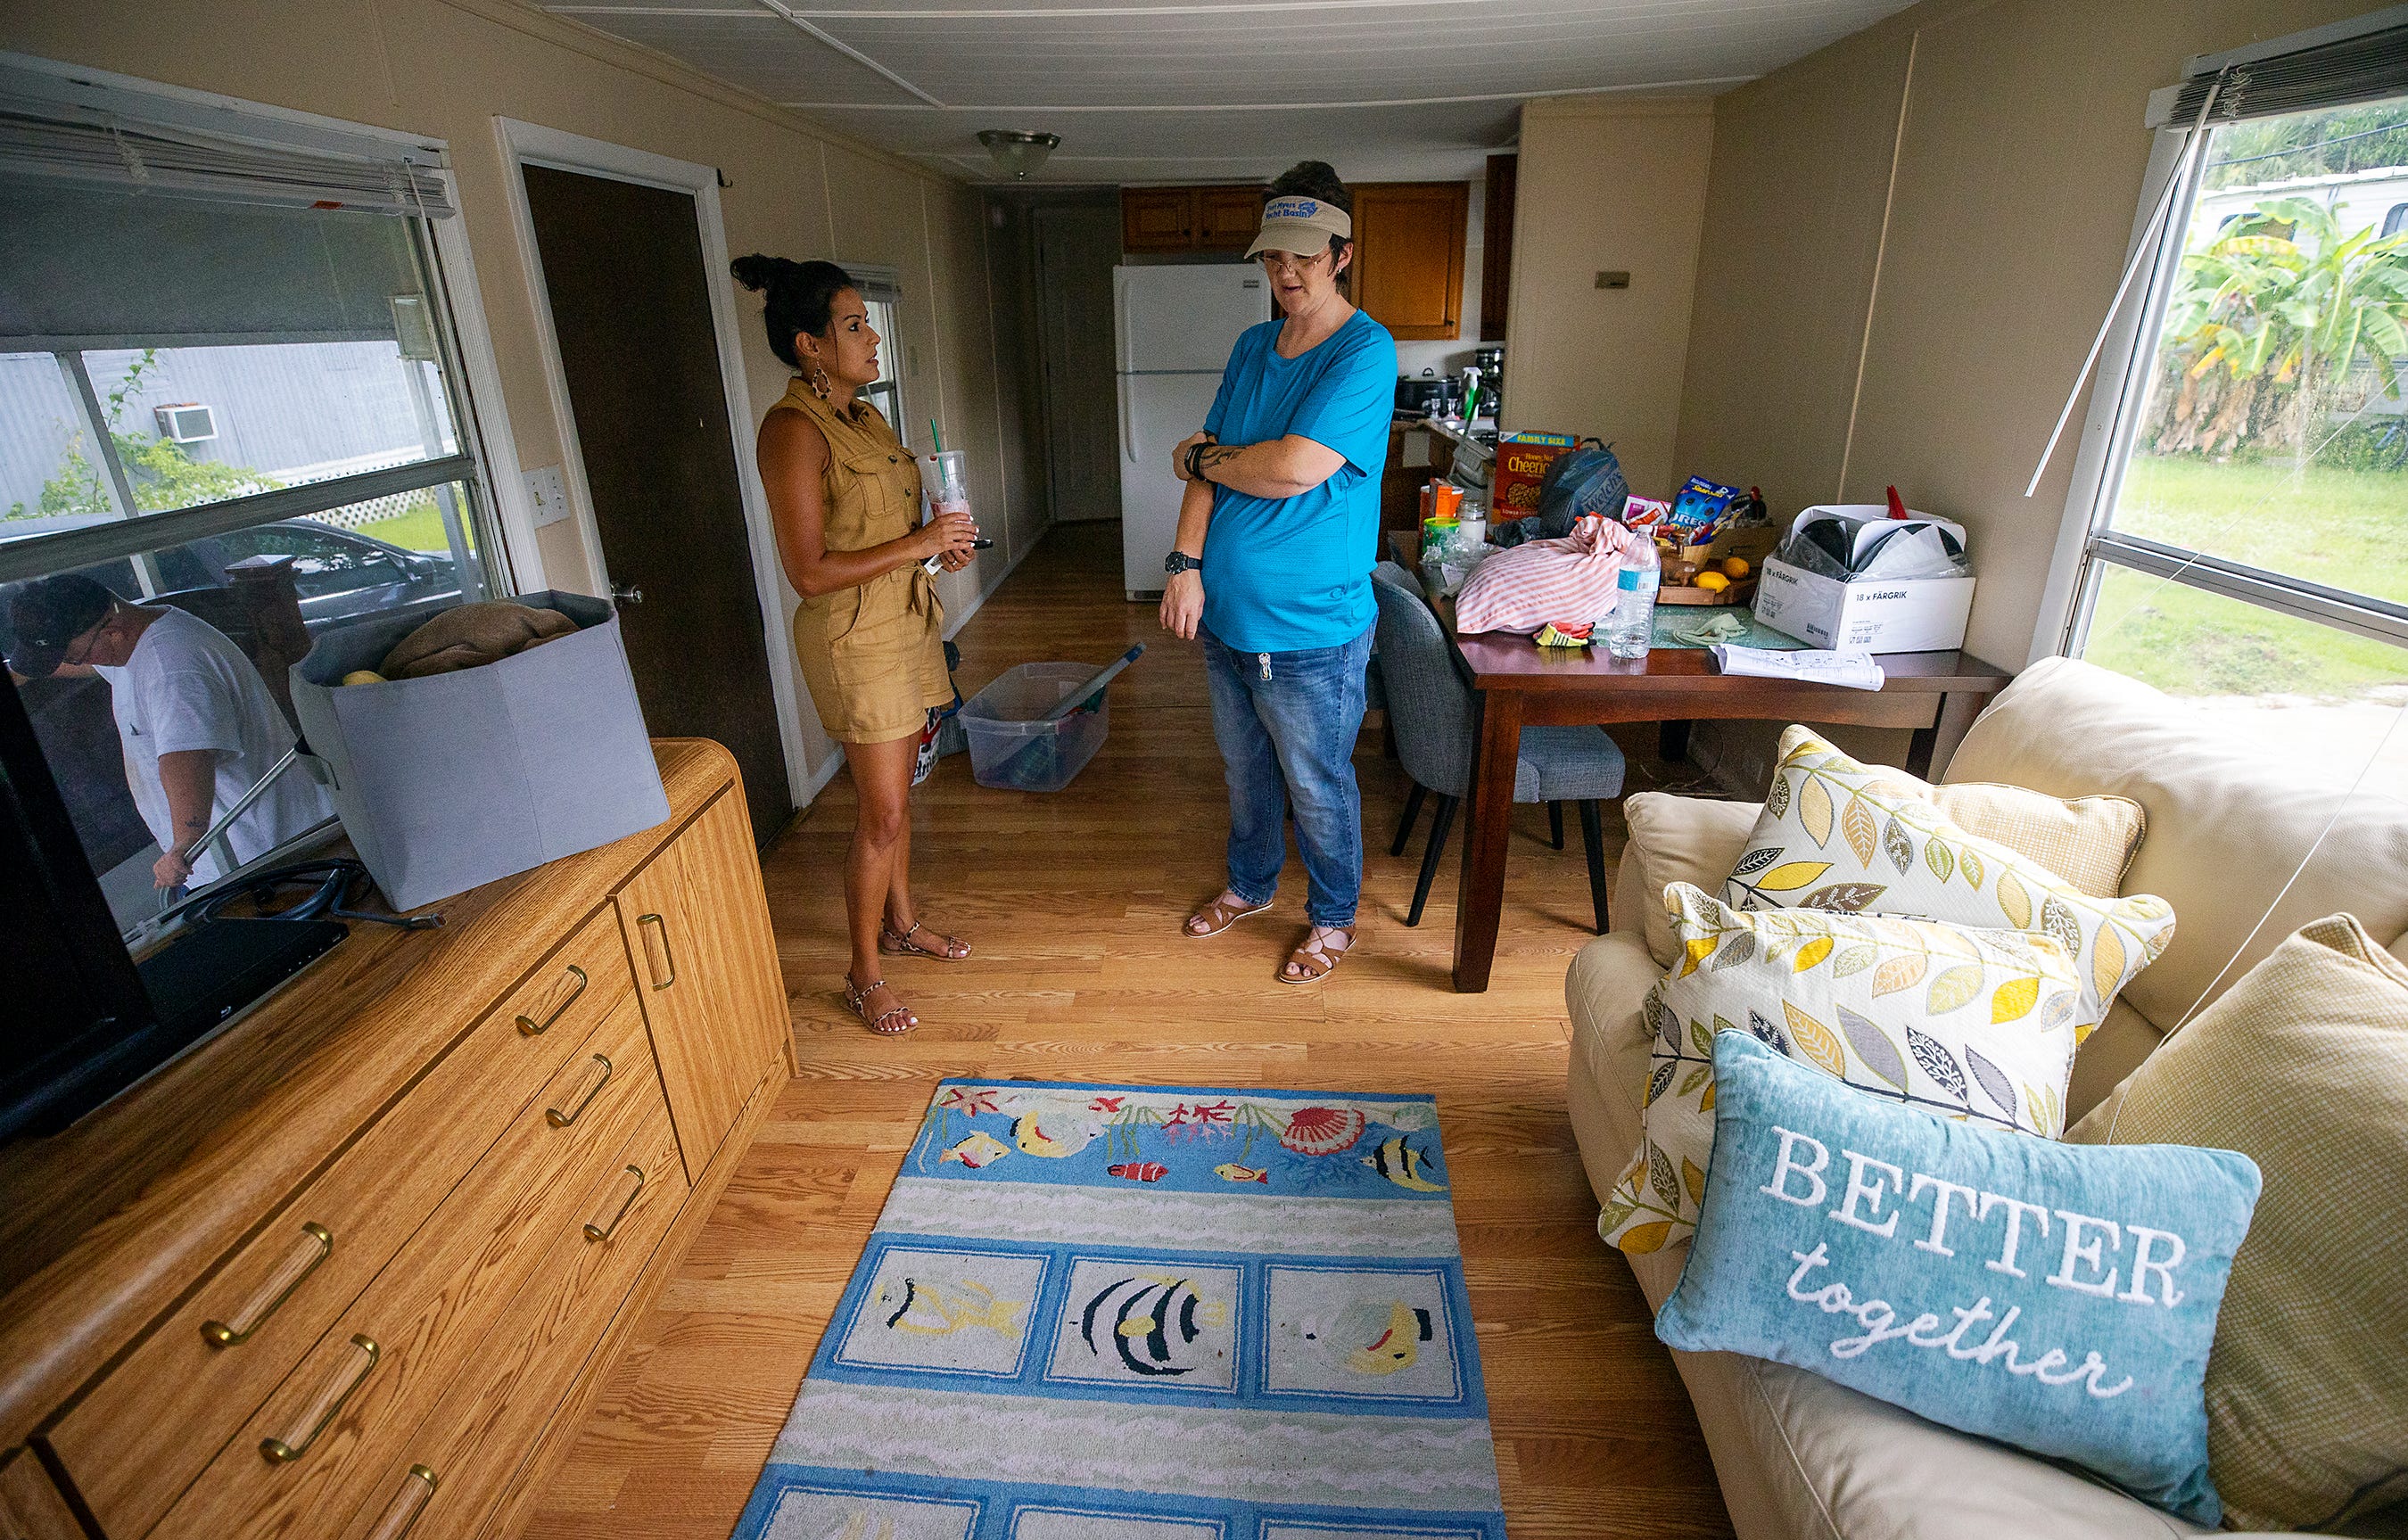 Better Together’s Isis LaRose, left, talked with Kyrstal Hartman on the day Hartman was reunited with her son, Jack, in their new home in July.